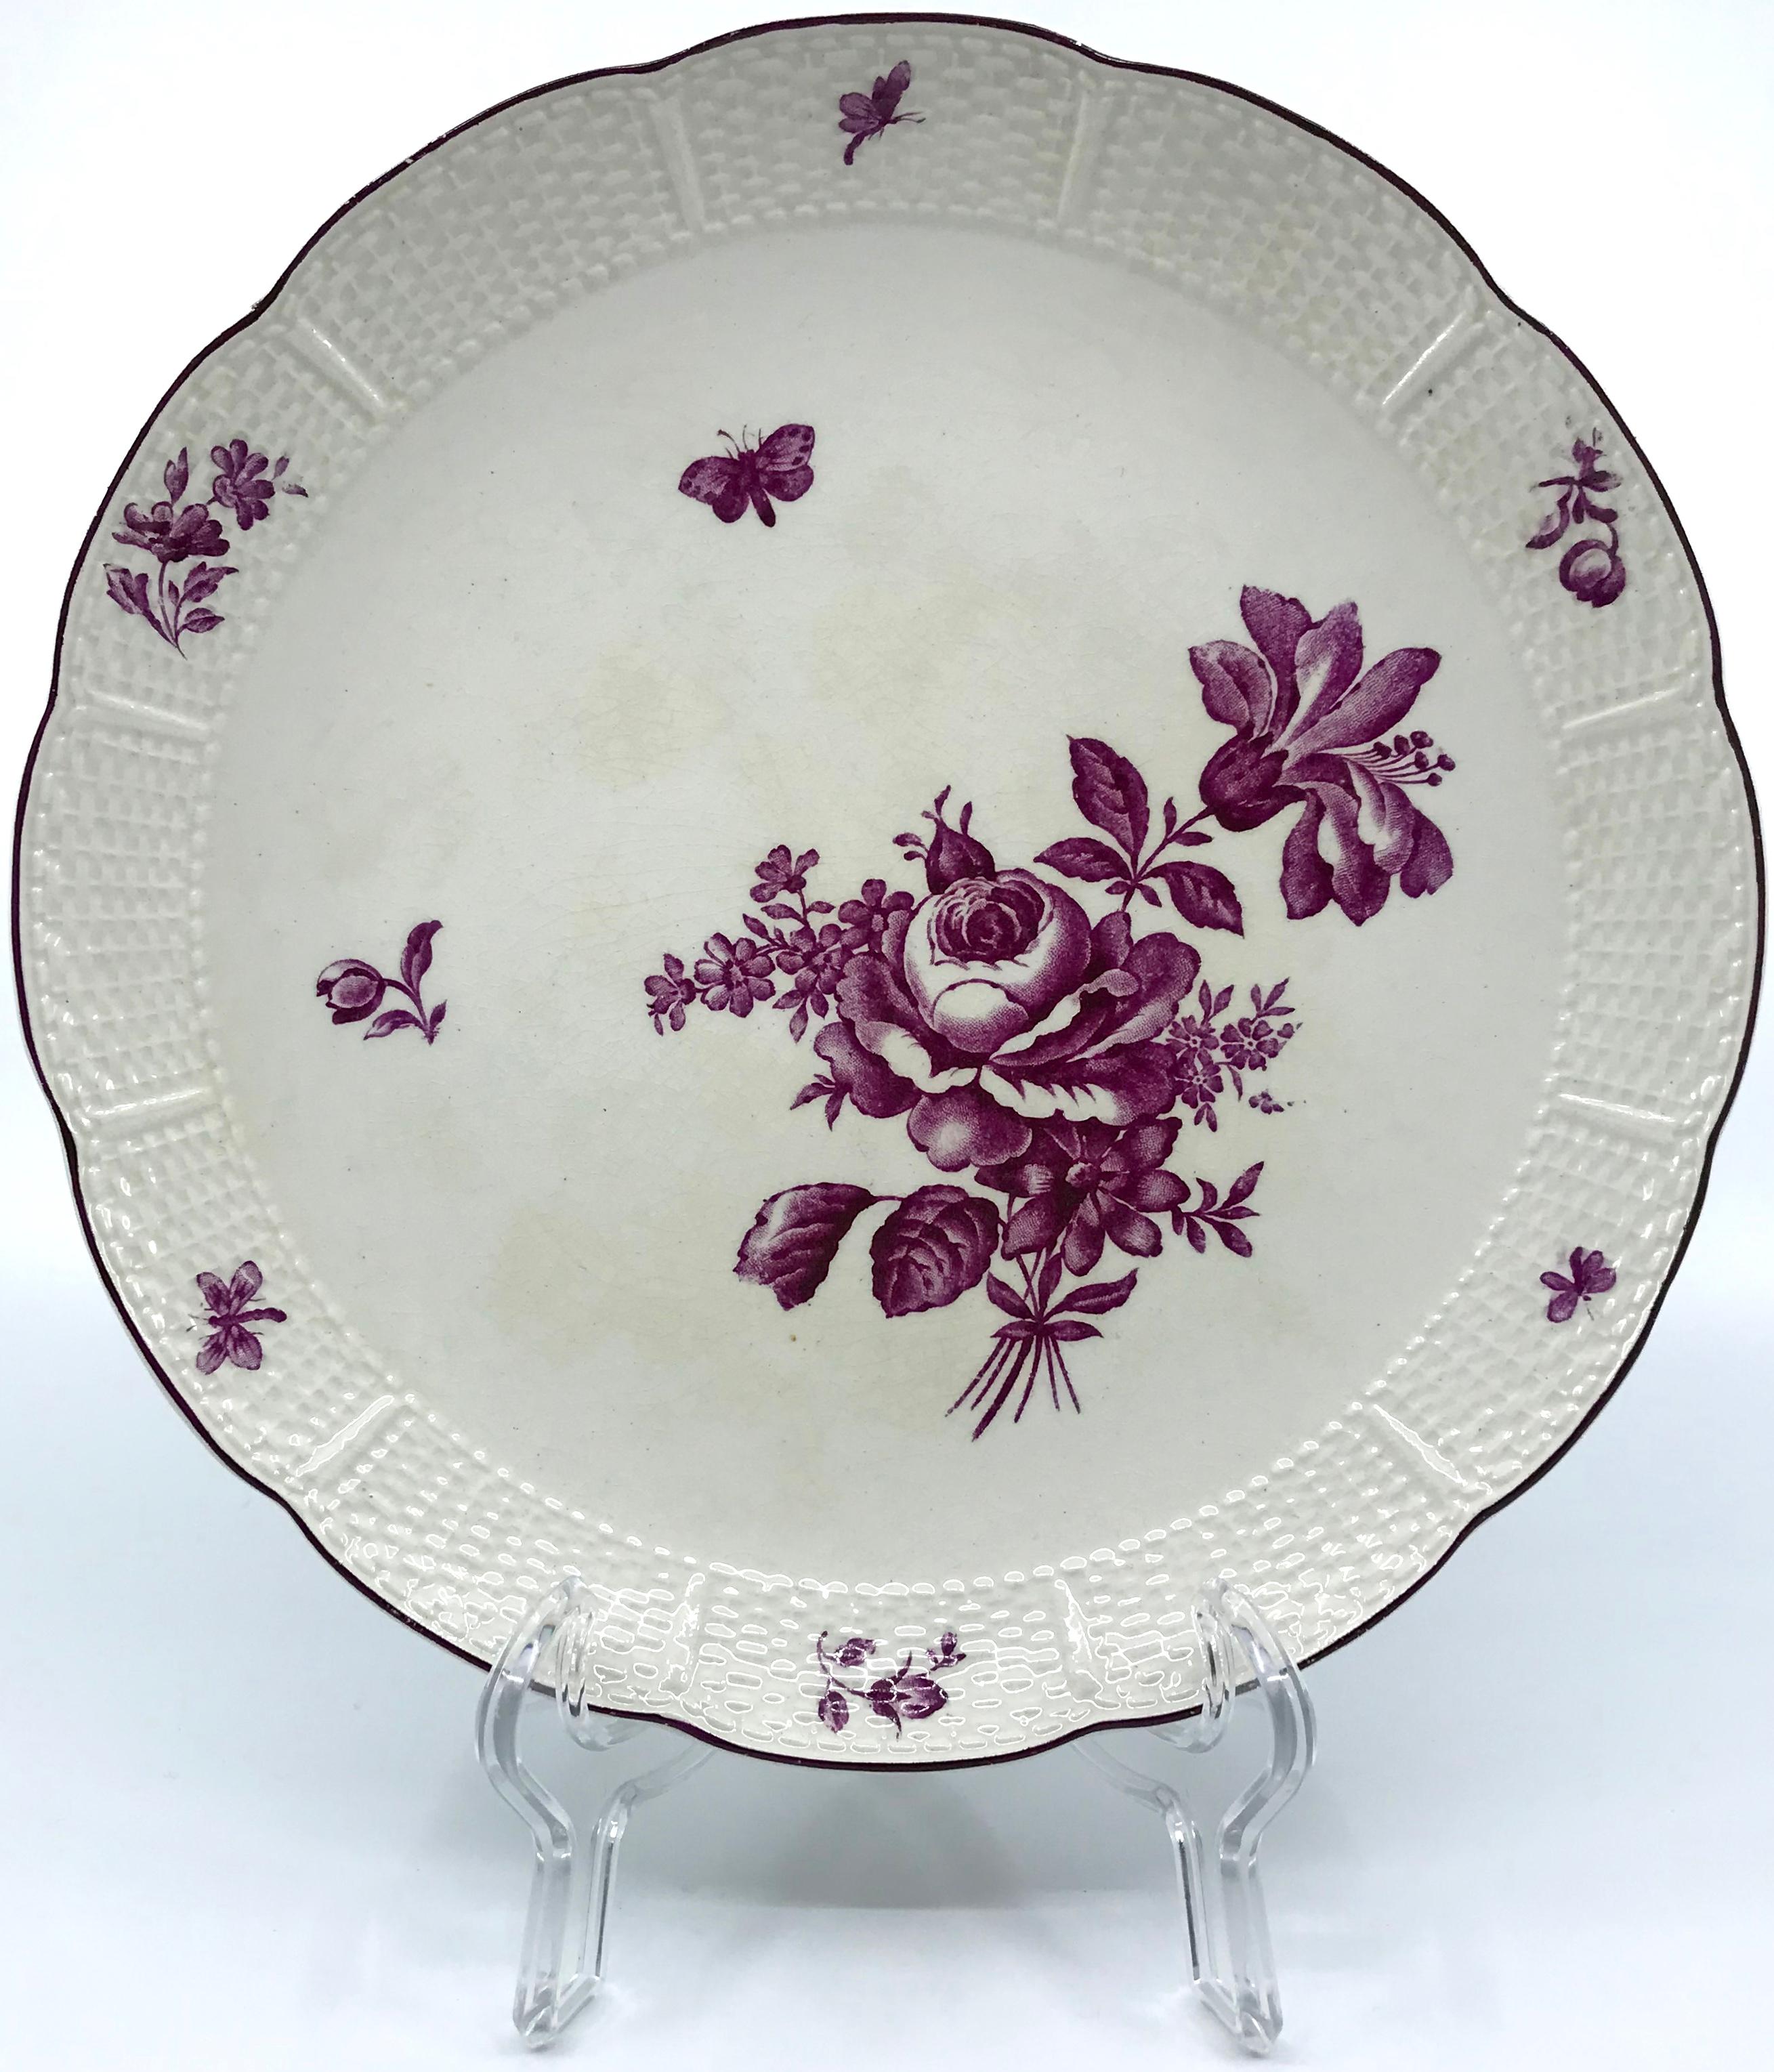 Magenta and white Wedgwood floral cake stand. Vintage Wedgwood low footed plate/cake stand in the Frankenthal pattern with magenta floral sprays and butterflies and basket-weave border and foot. Stamped Wedgwood, made for the French market, England,